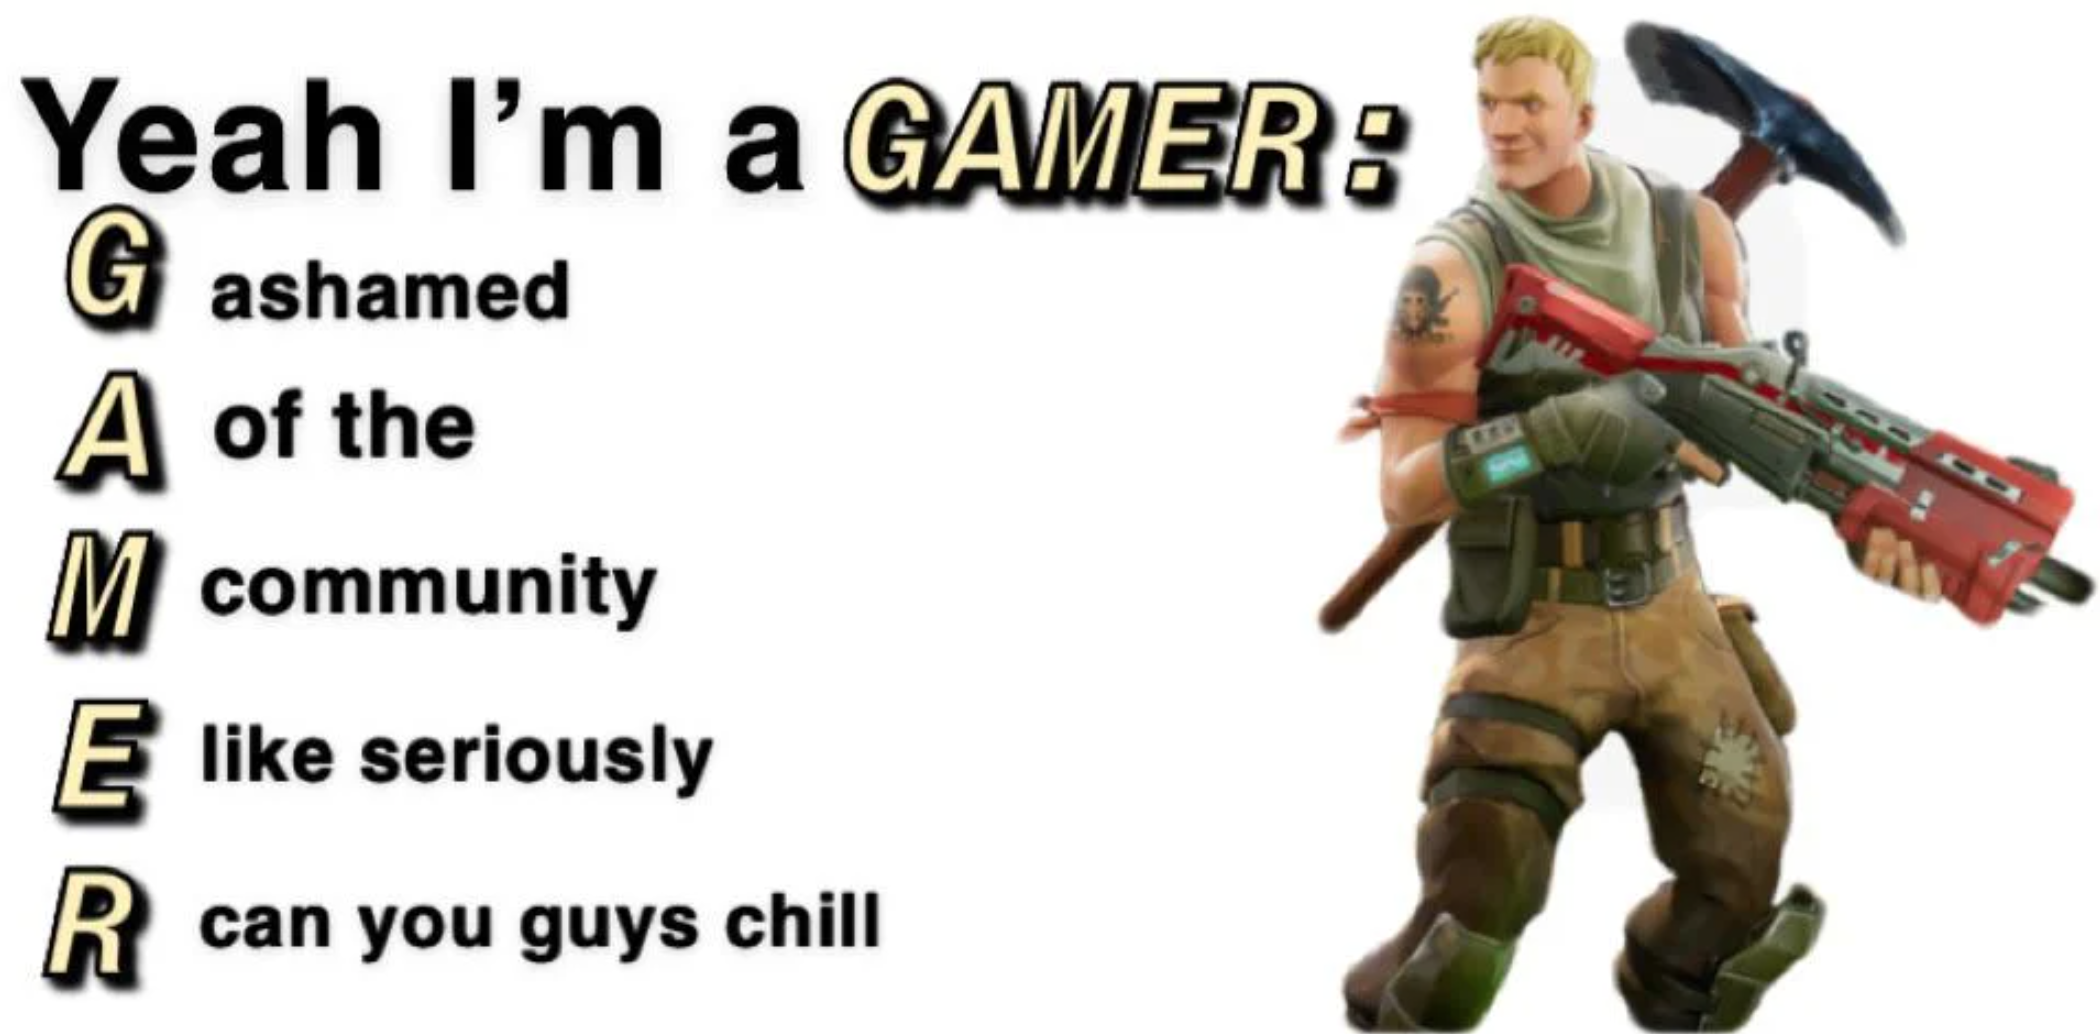 funny gaming memes - mercenary - Yeah I'm a Gamer G ashamed A of the M community E seriously R can you guys chill